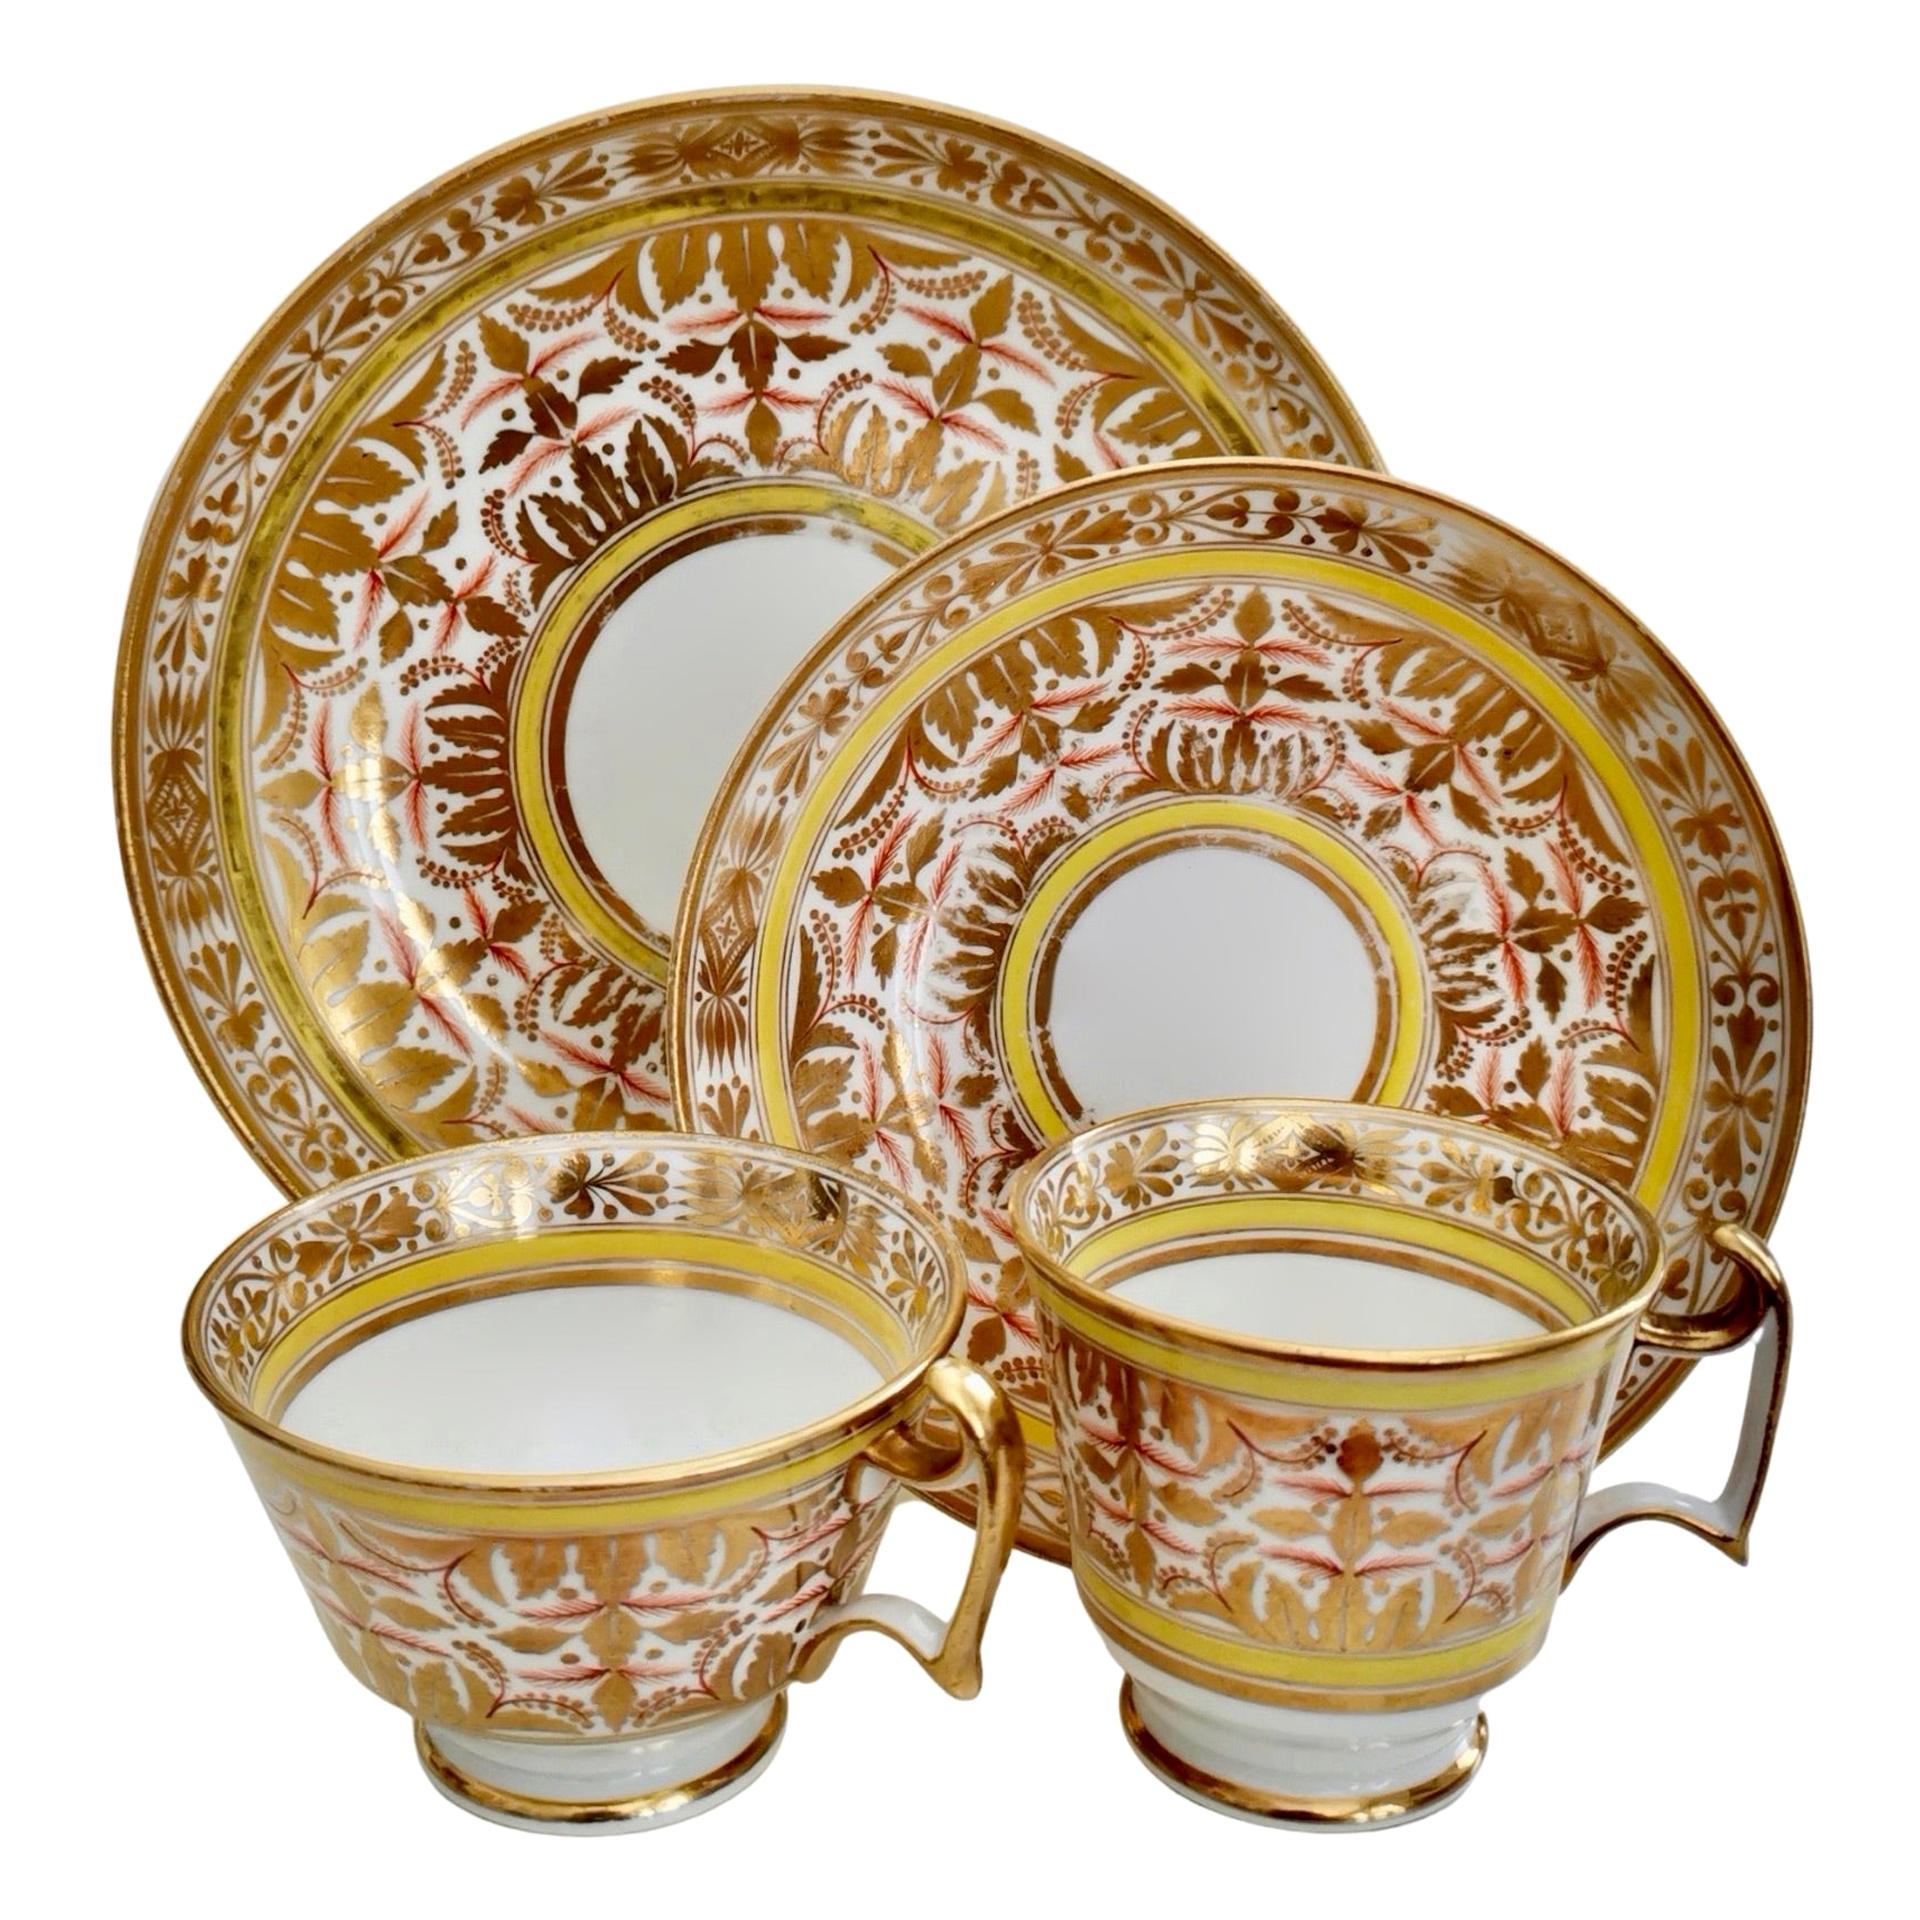 Spode Porcelain Teacup Set, Gilt, Yellow and Red Regency Pattern, circa 1815